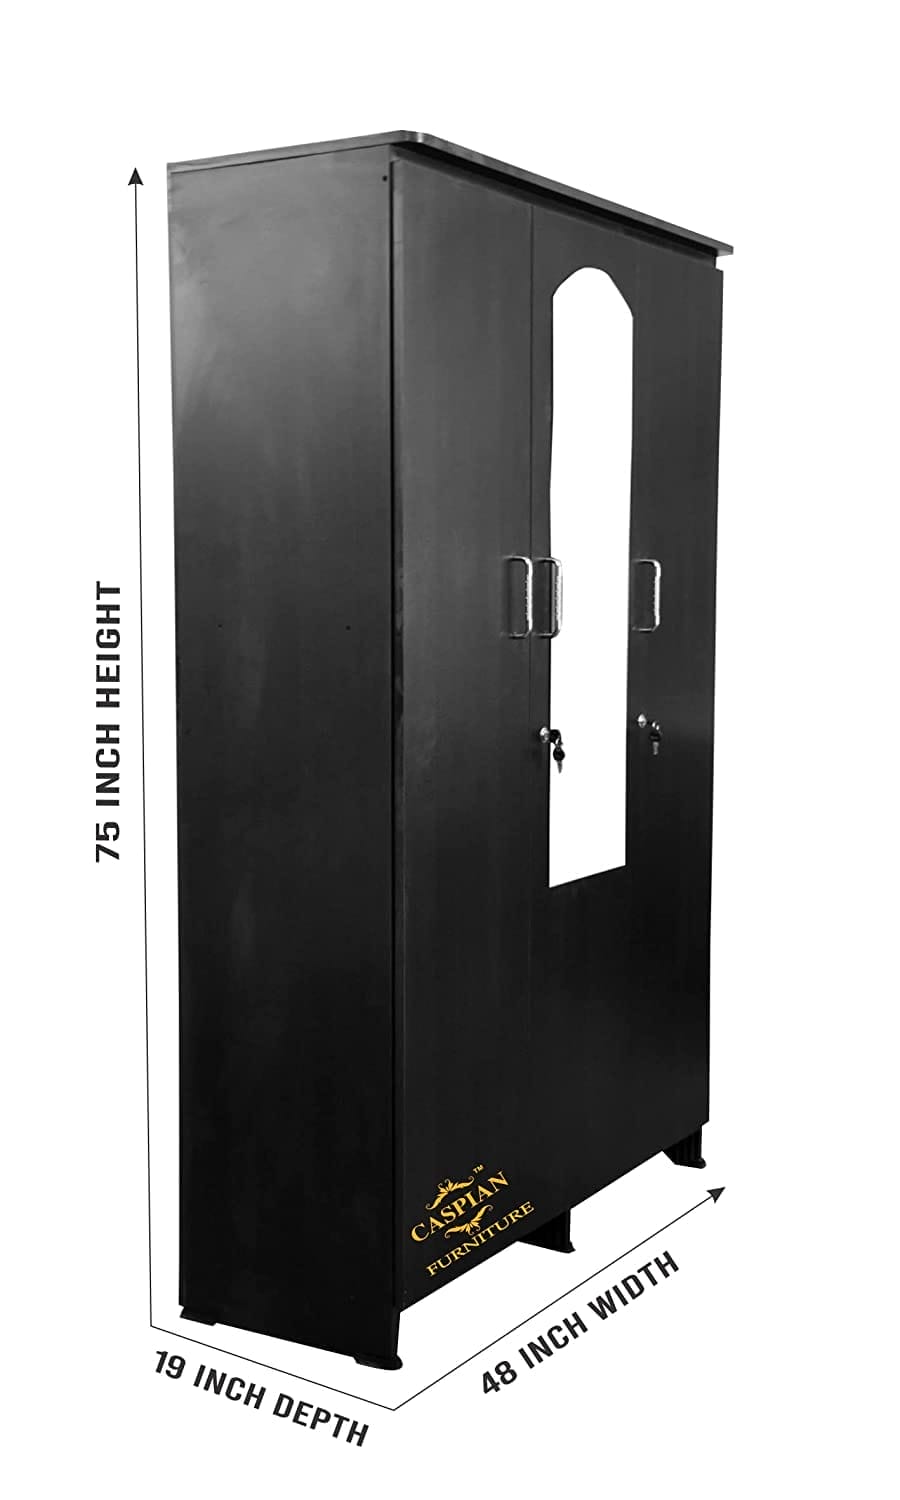 Almirah || Wooden Cupboard || Home Storage Cabinet Engineered Wood 3 Door Wardrobe (Finish Color - Coffee Black, Mirror Included, Pre-Assembled)